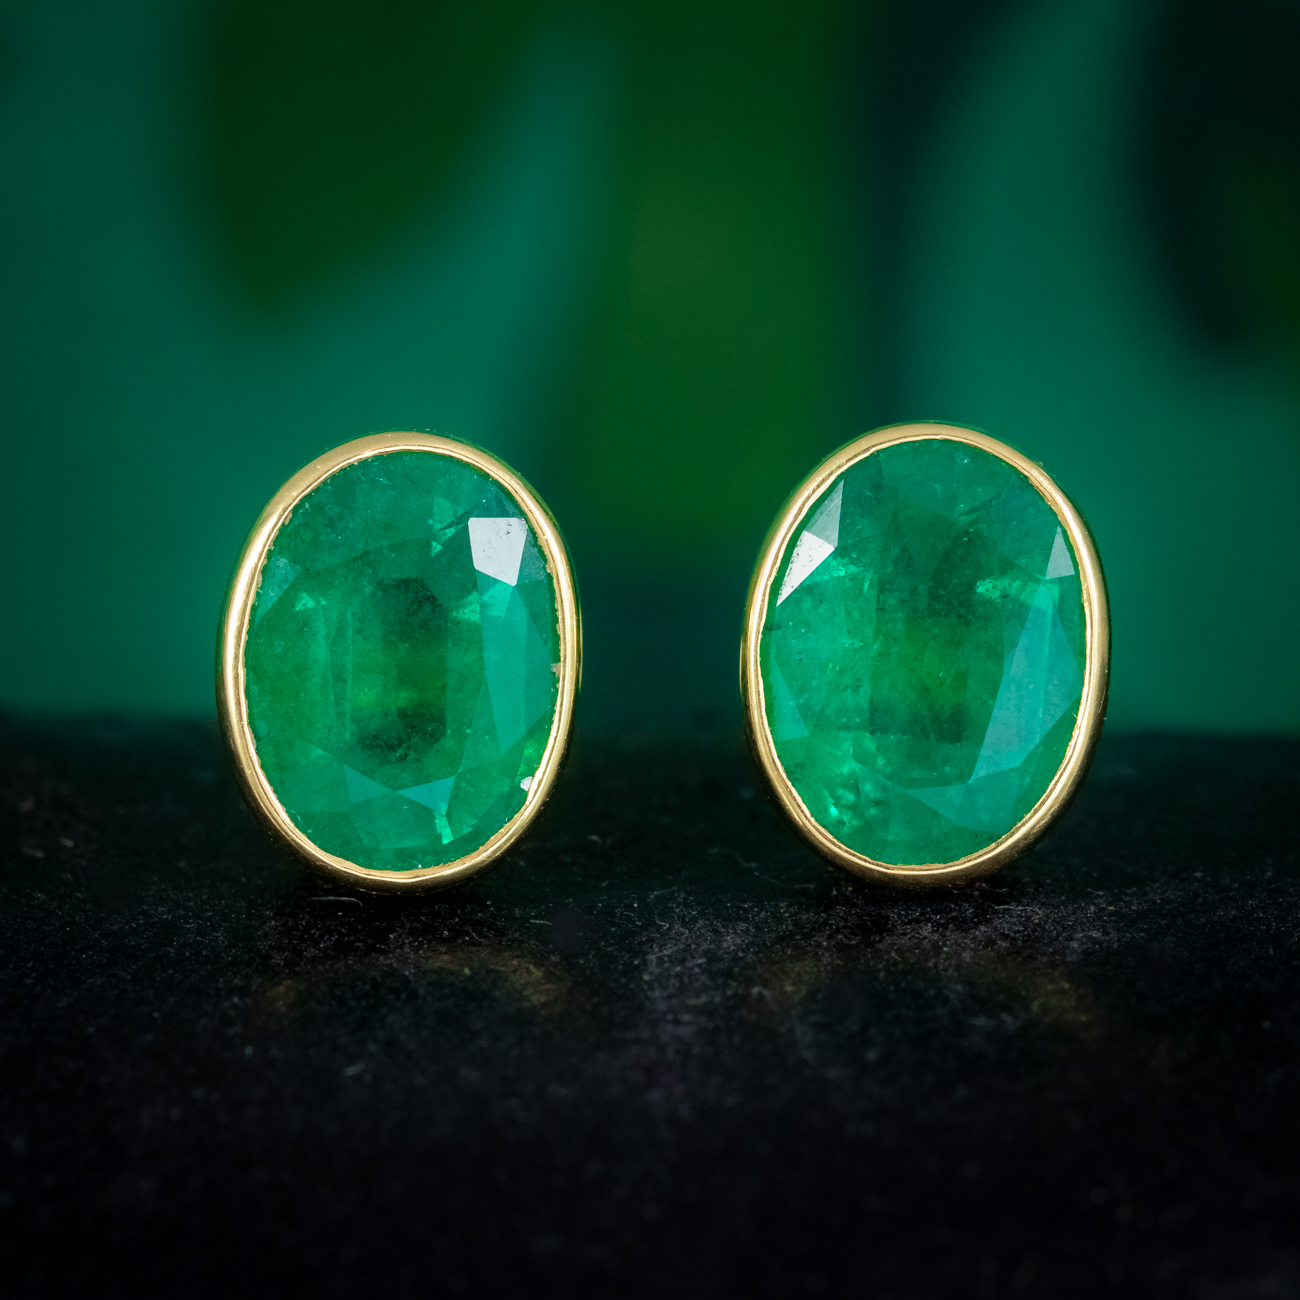 Vintage Natural Emerald Stud Earrings 18ct Gold 3.2ct Of Emerald